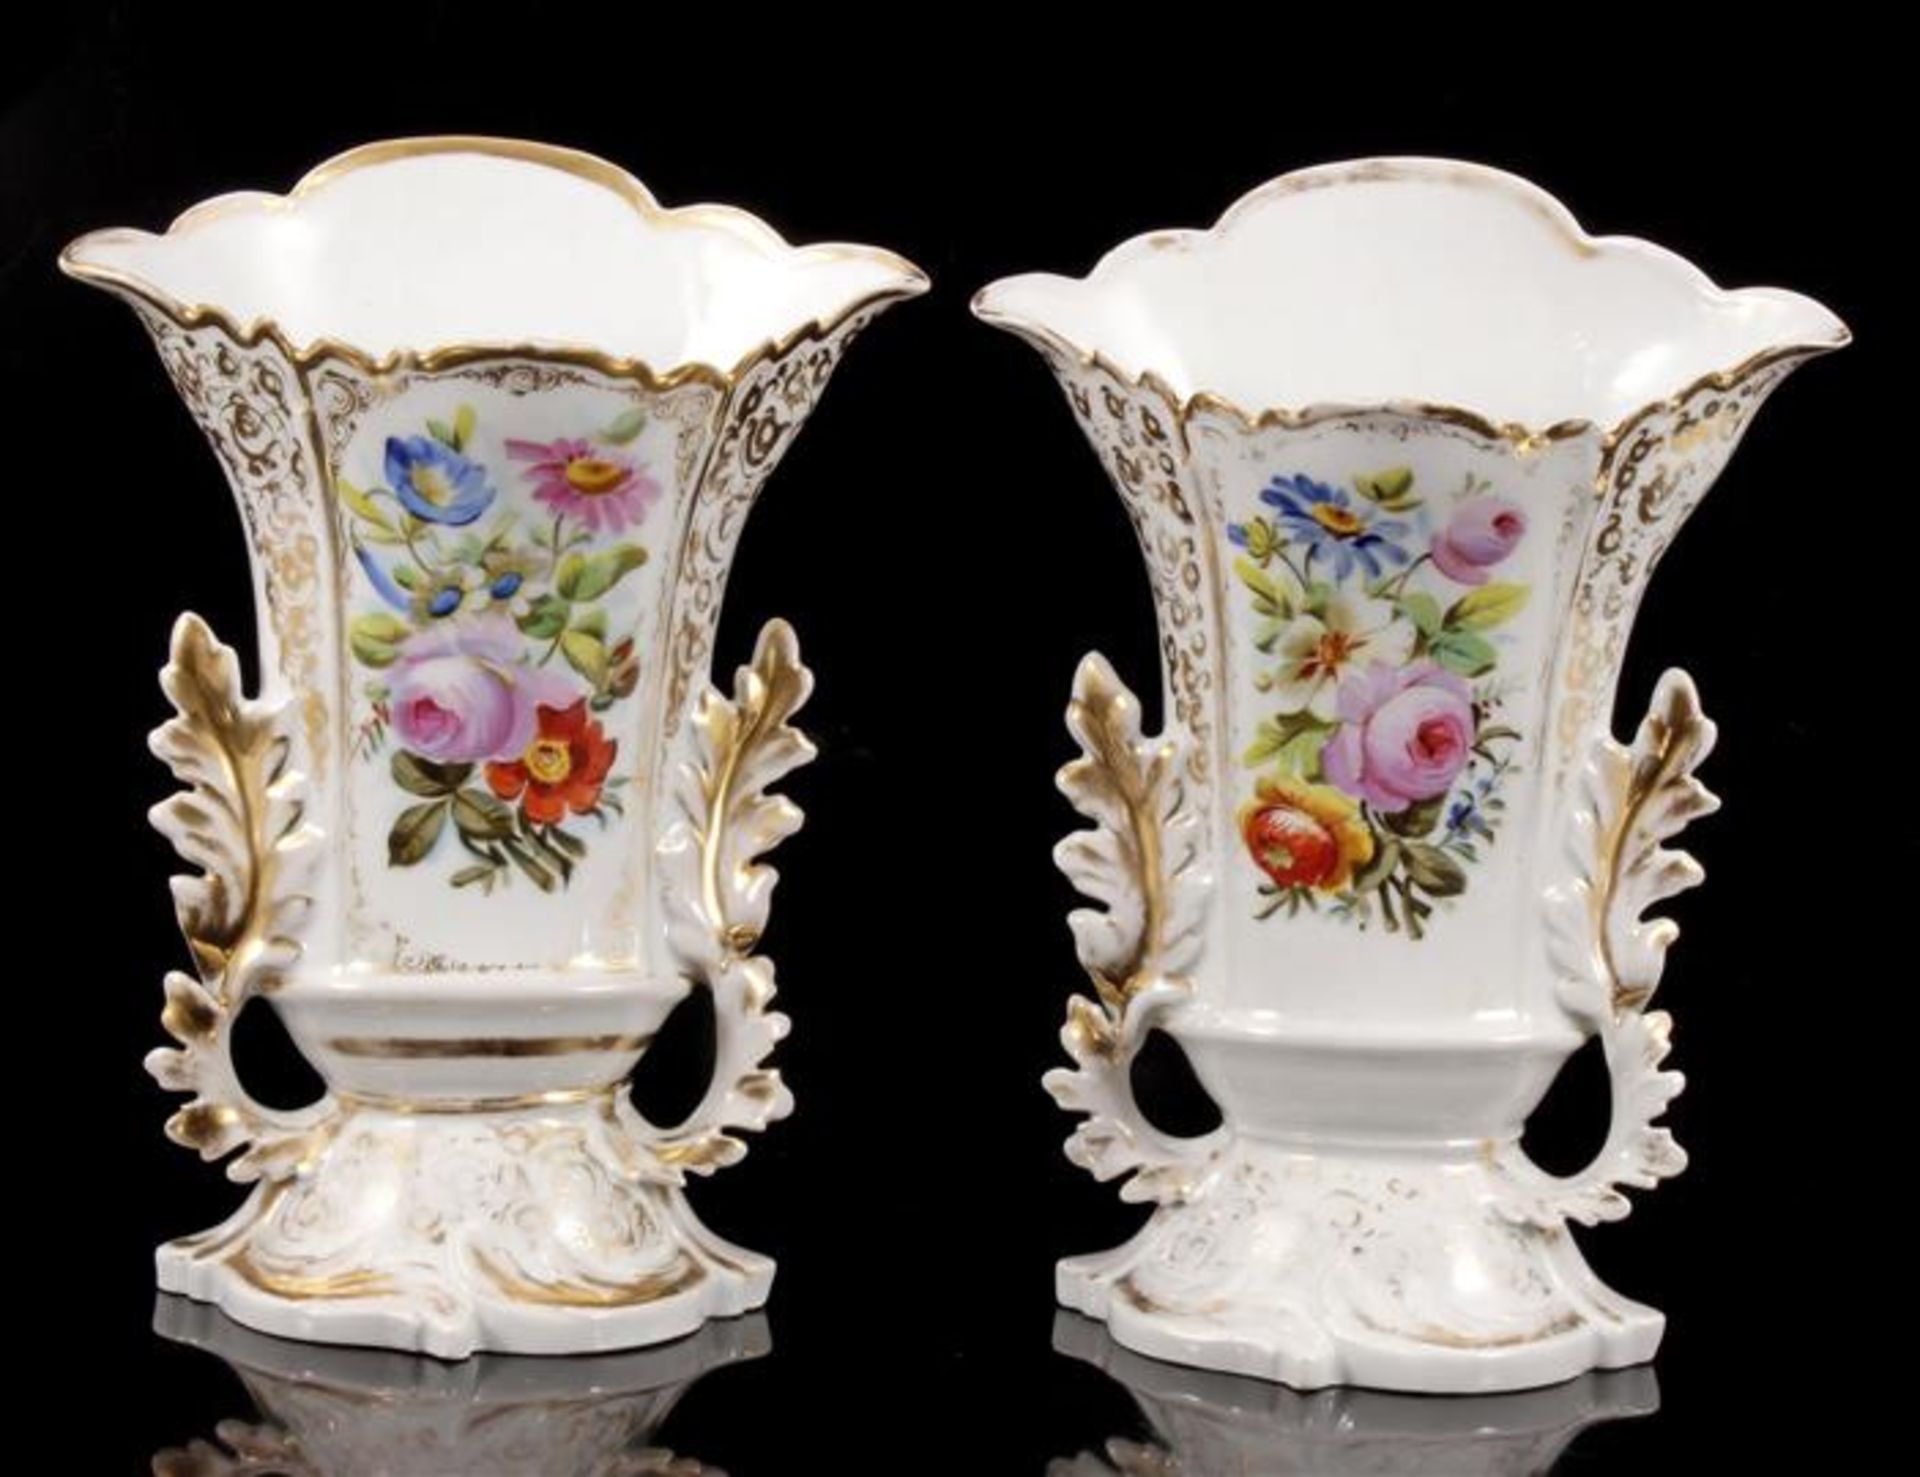 2 19th century porcelain decorative vases with polychrome and gold-colored decoration, approx. 1880,